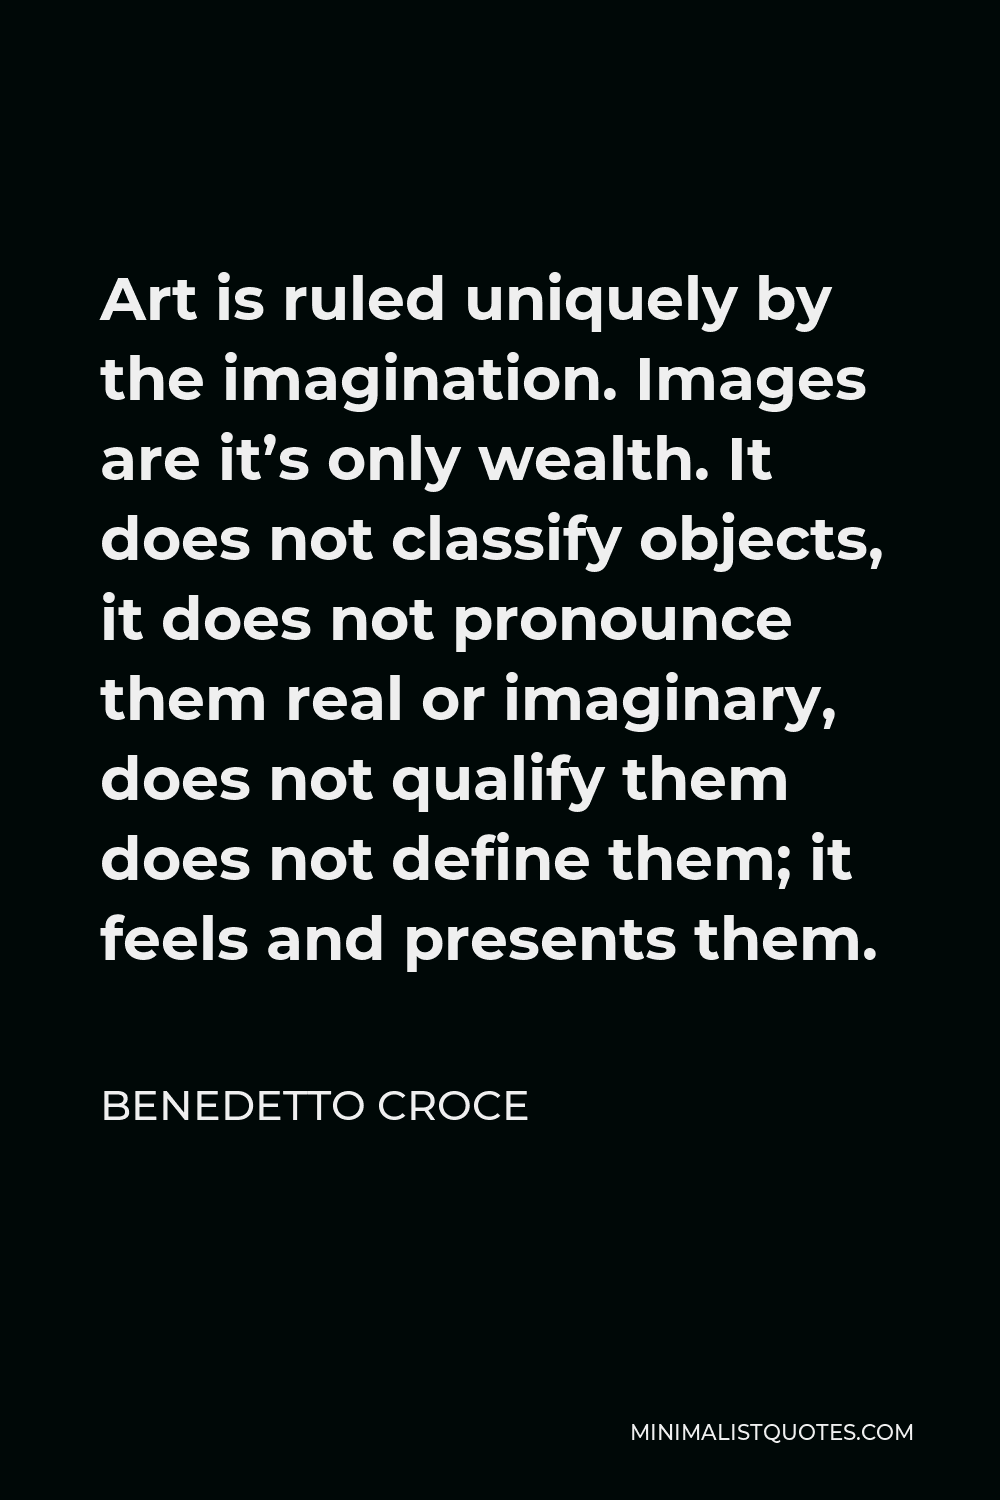 Benedetto Croce Quote - Art is ruled uniquely by the imagination. Images are it’s only wealth. It does not classify objects, it does not pronounce them real or imaginary, does not qualify them does not define them; it feels and presents them.